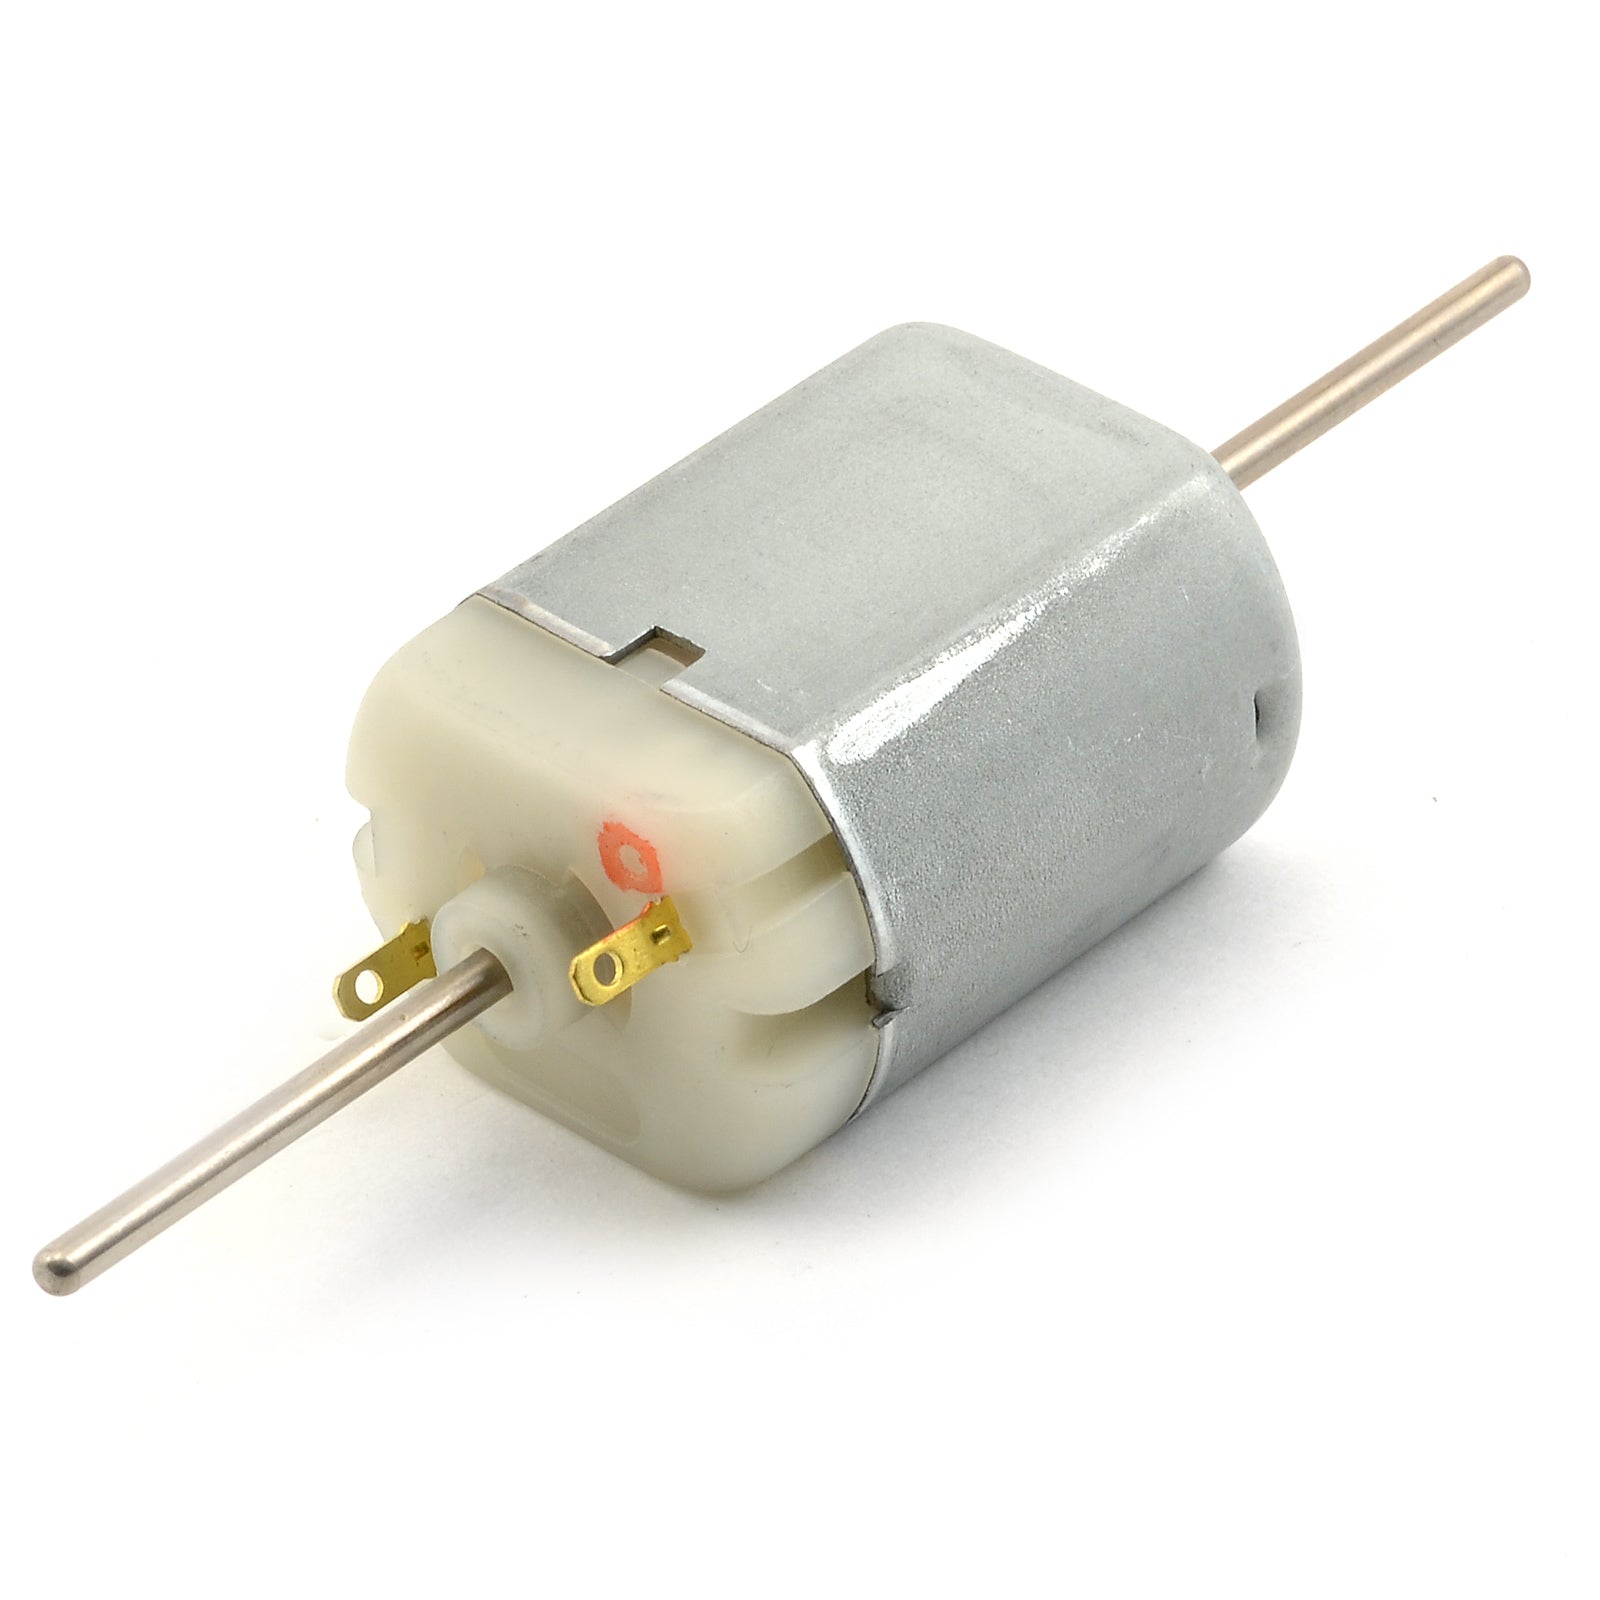 Flat Can Motor, Style 2430, 12v - Micro - Mark Electrical Motors